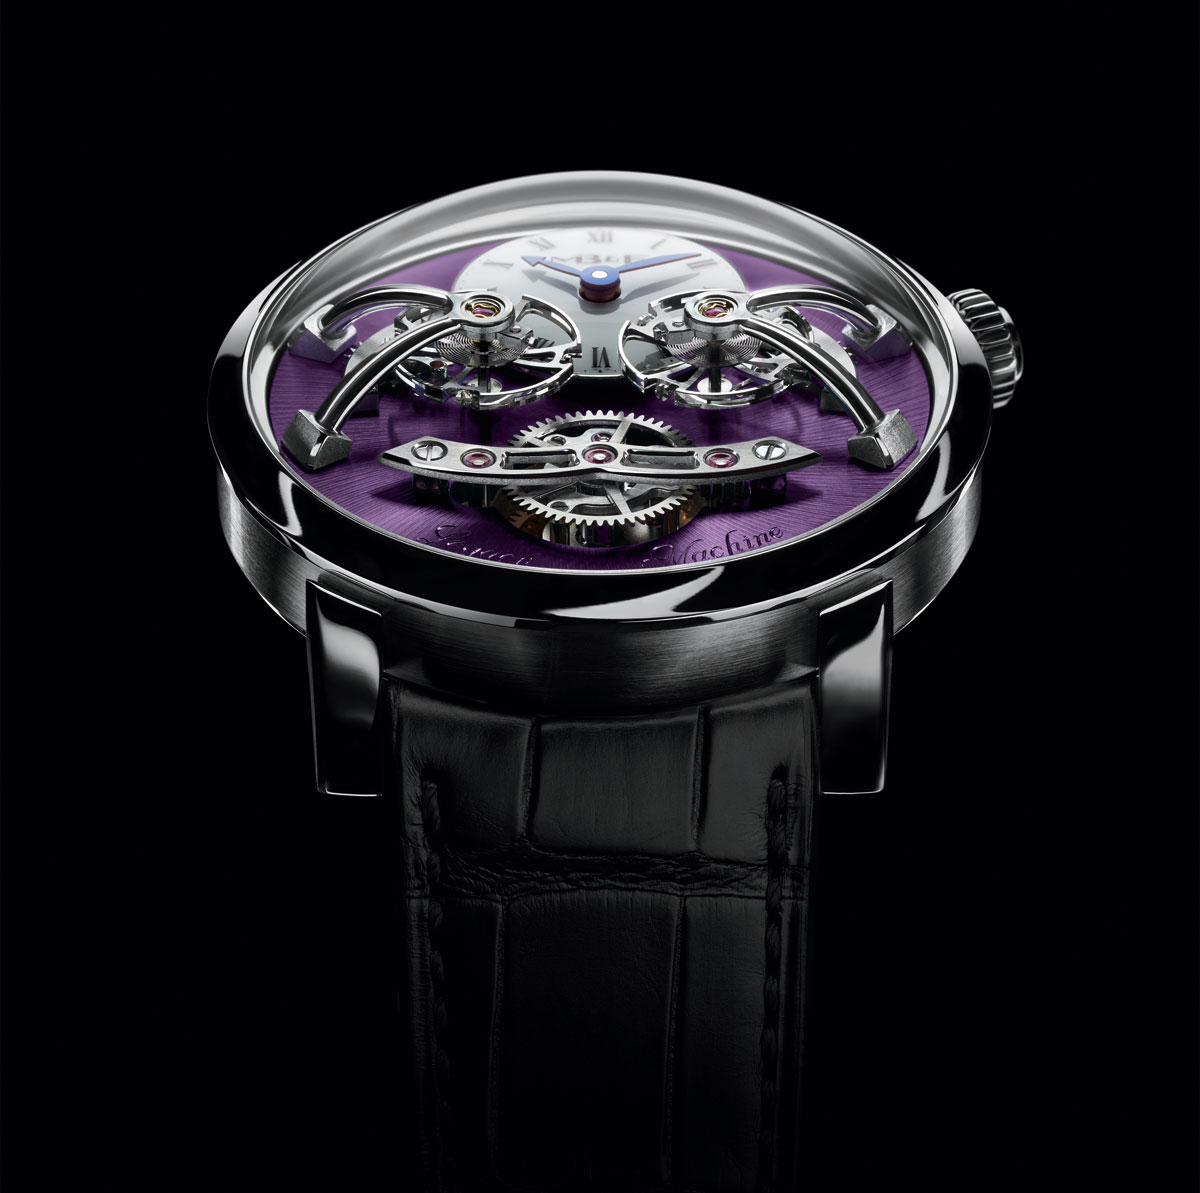 LM2 White Gold Purple – 12-piece Limited Edition Watch by MB&F